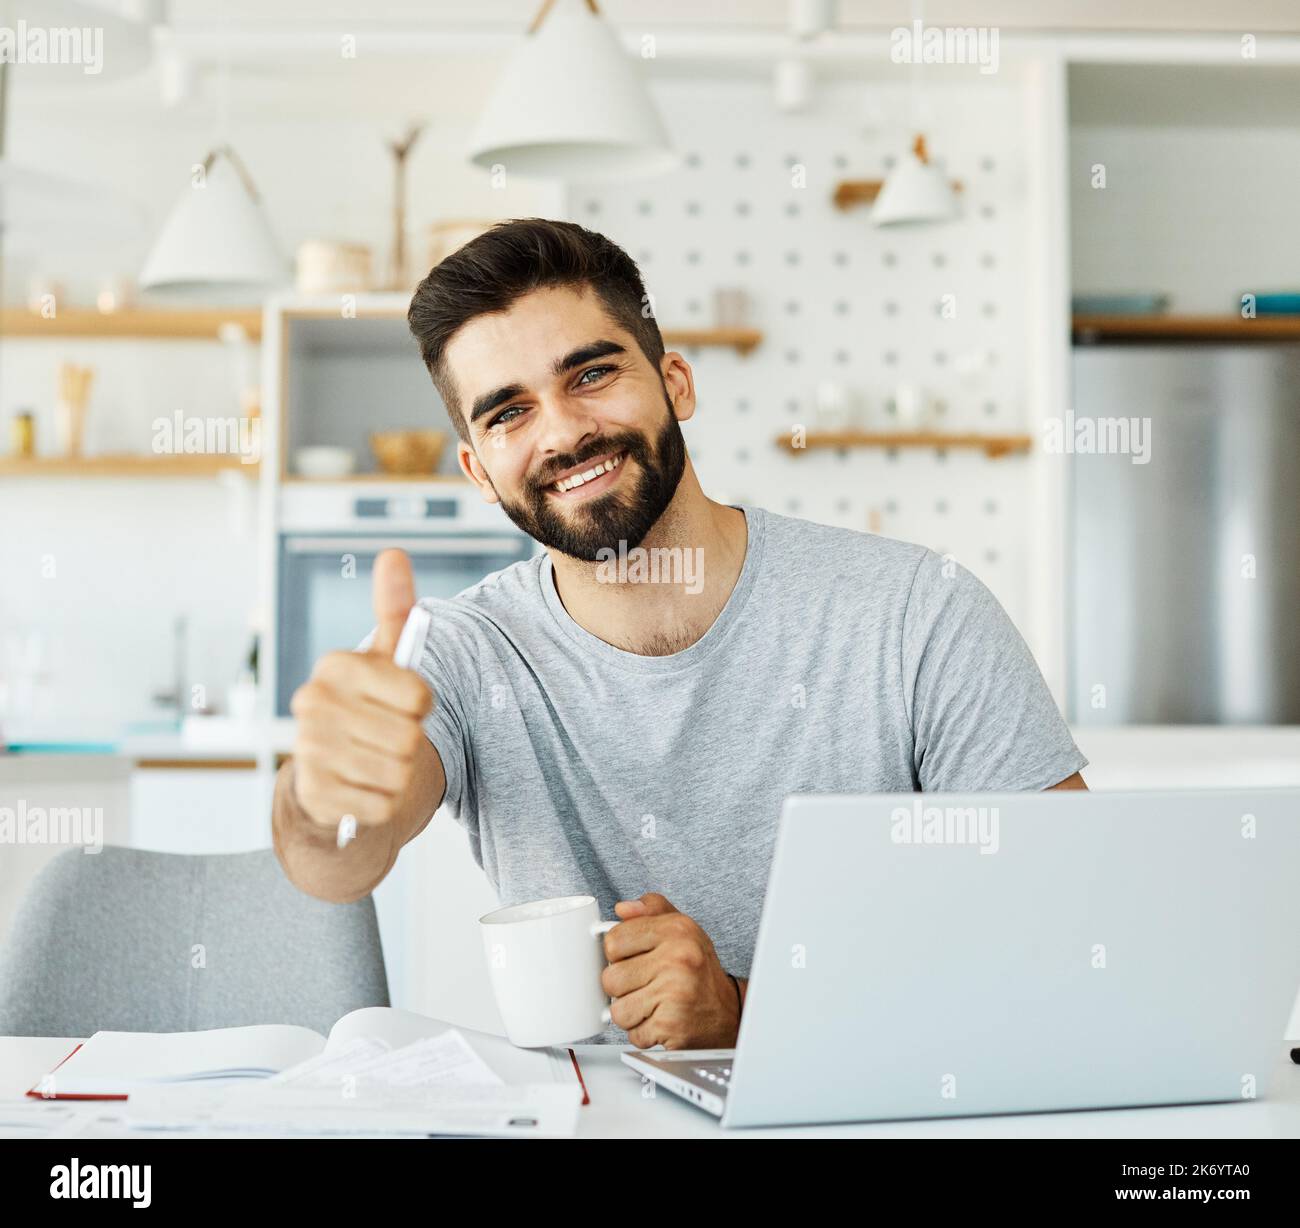 laptop man computer home technology young lifestyle business internet study indoor male reading Stock Photo